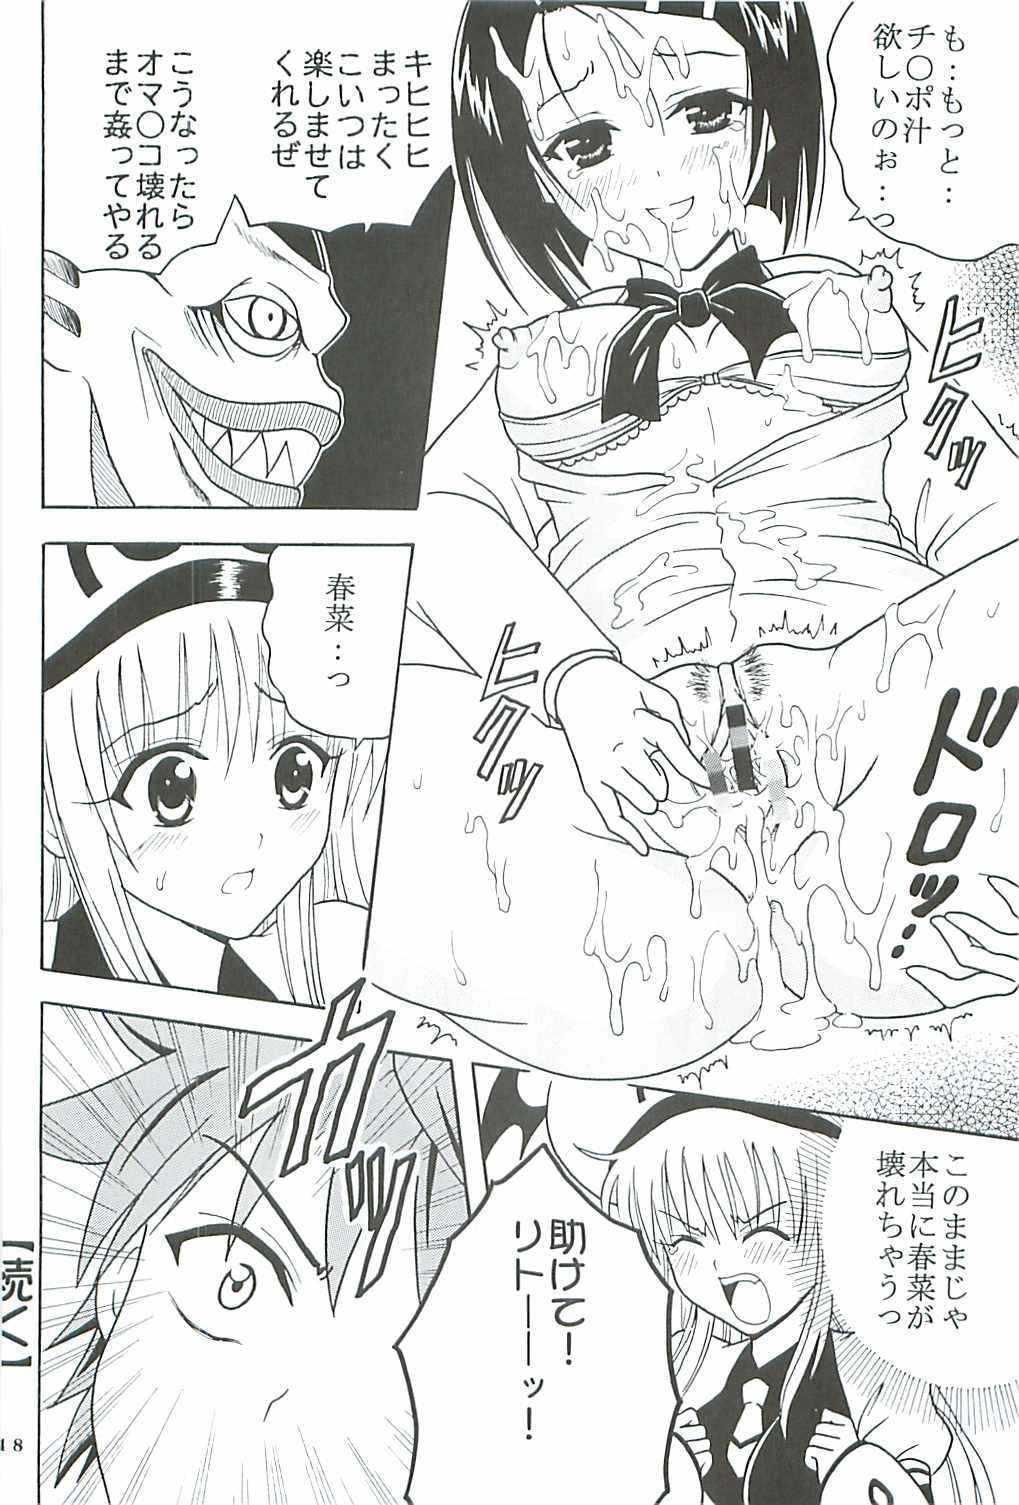 [St.Rio] ToLOVE Ryu 2 (To Love Ru) page 49 full